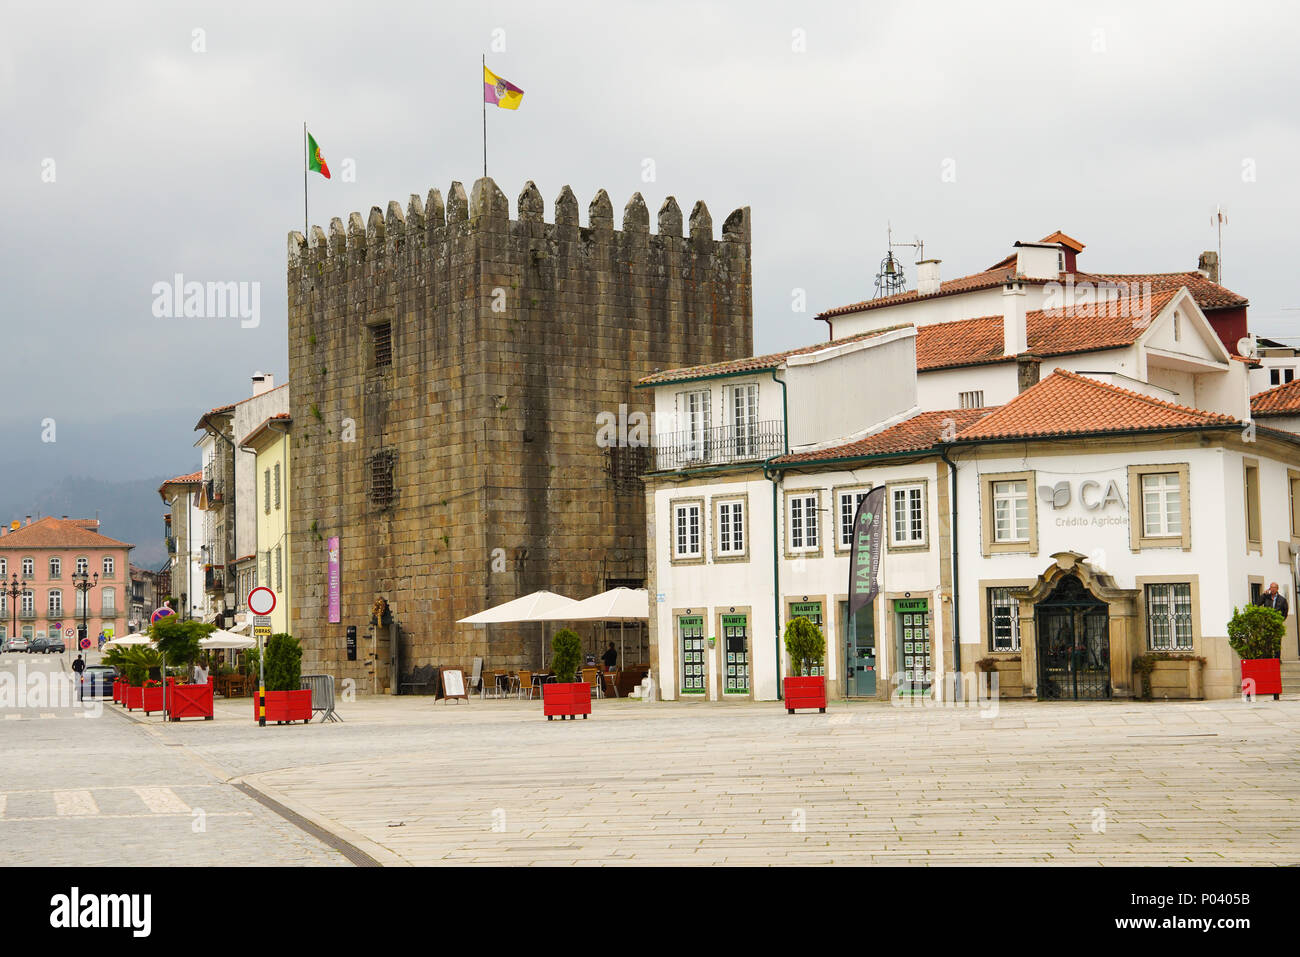 View of Ponte de Lima by river bank, Portugal. Stock Photo